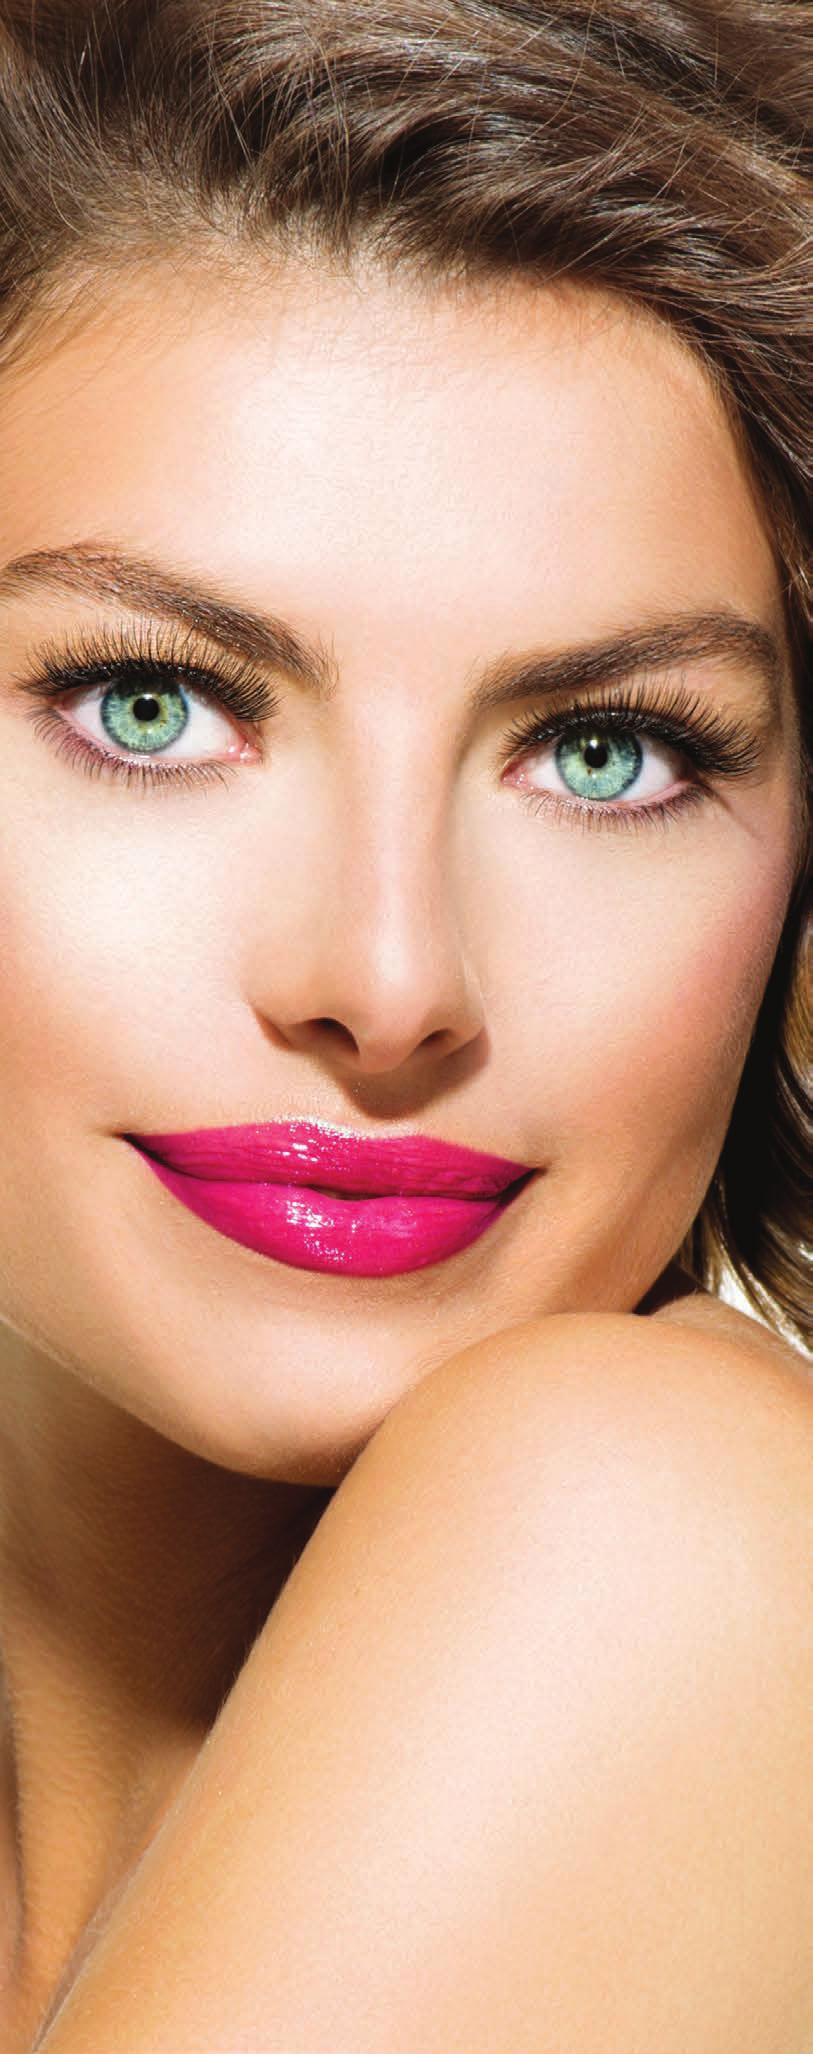 up to % 50 off 30 % off COSMETIC LOOK YOUNGER INJECTABLES ARE AVAILABLE IN OUR CLINICS * 25 % off *Appointments are